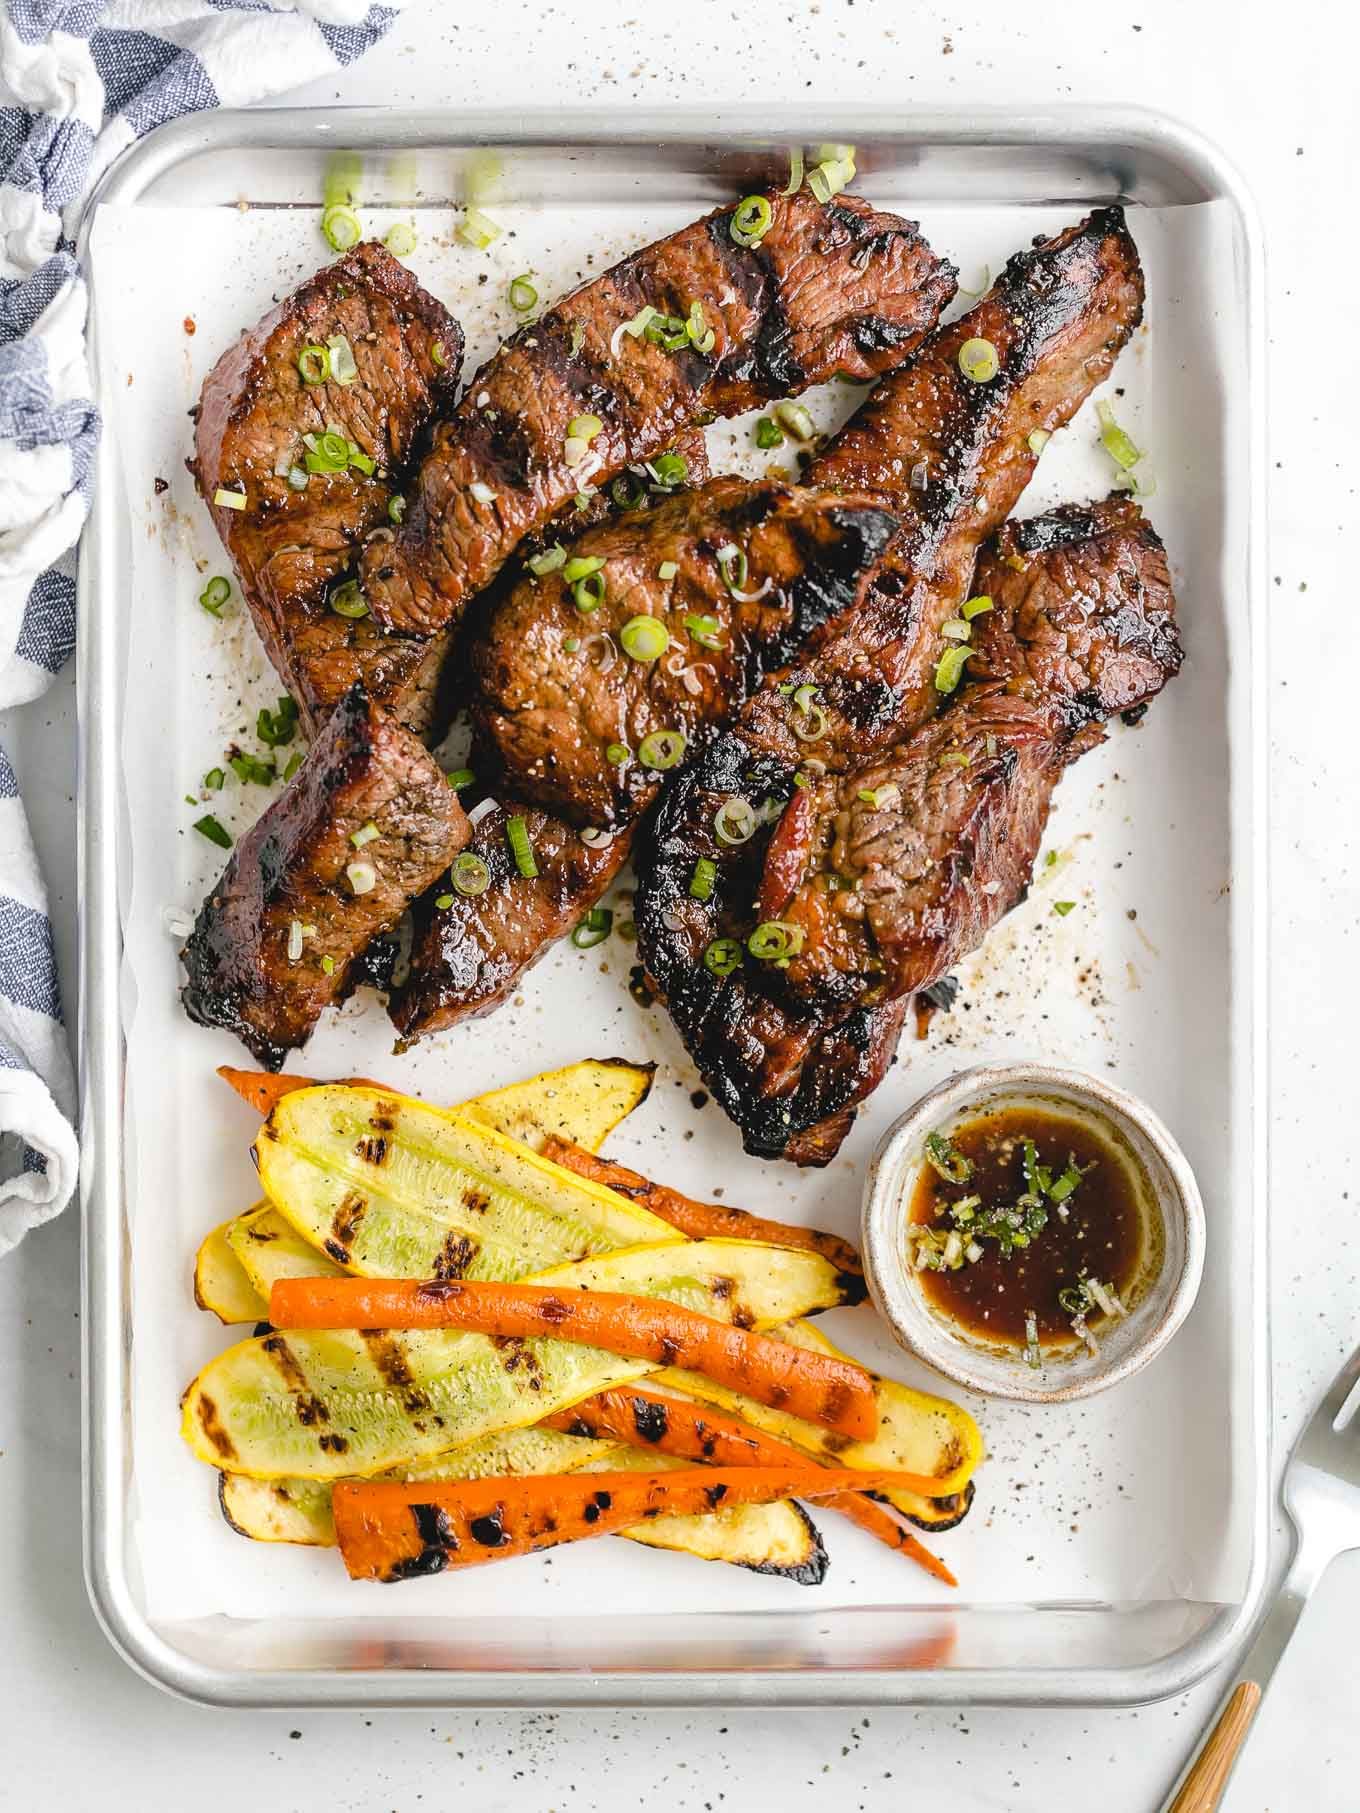 marinated and grilled steak tips for your 4th of july bbq recipe